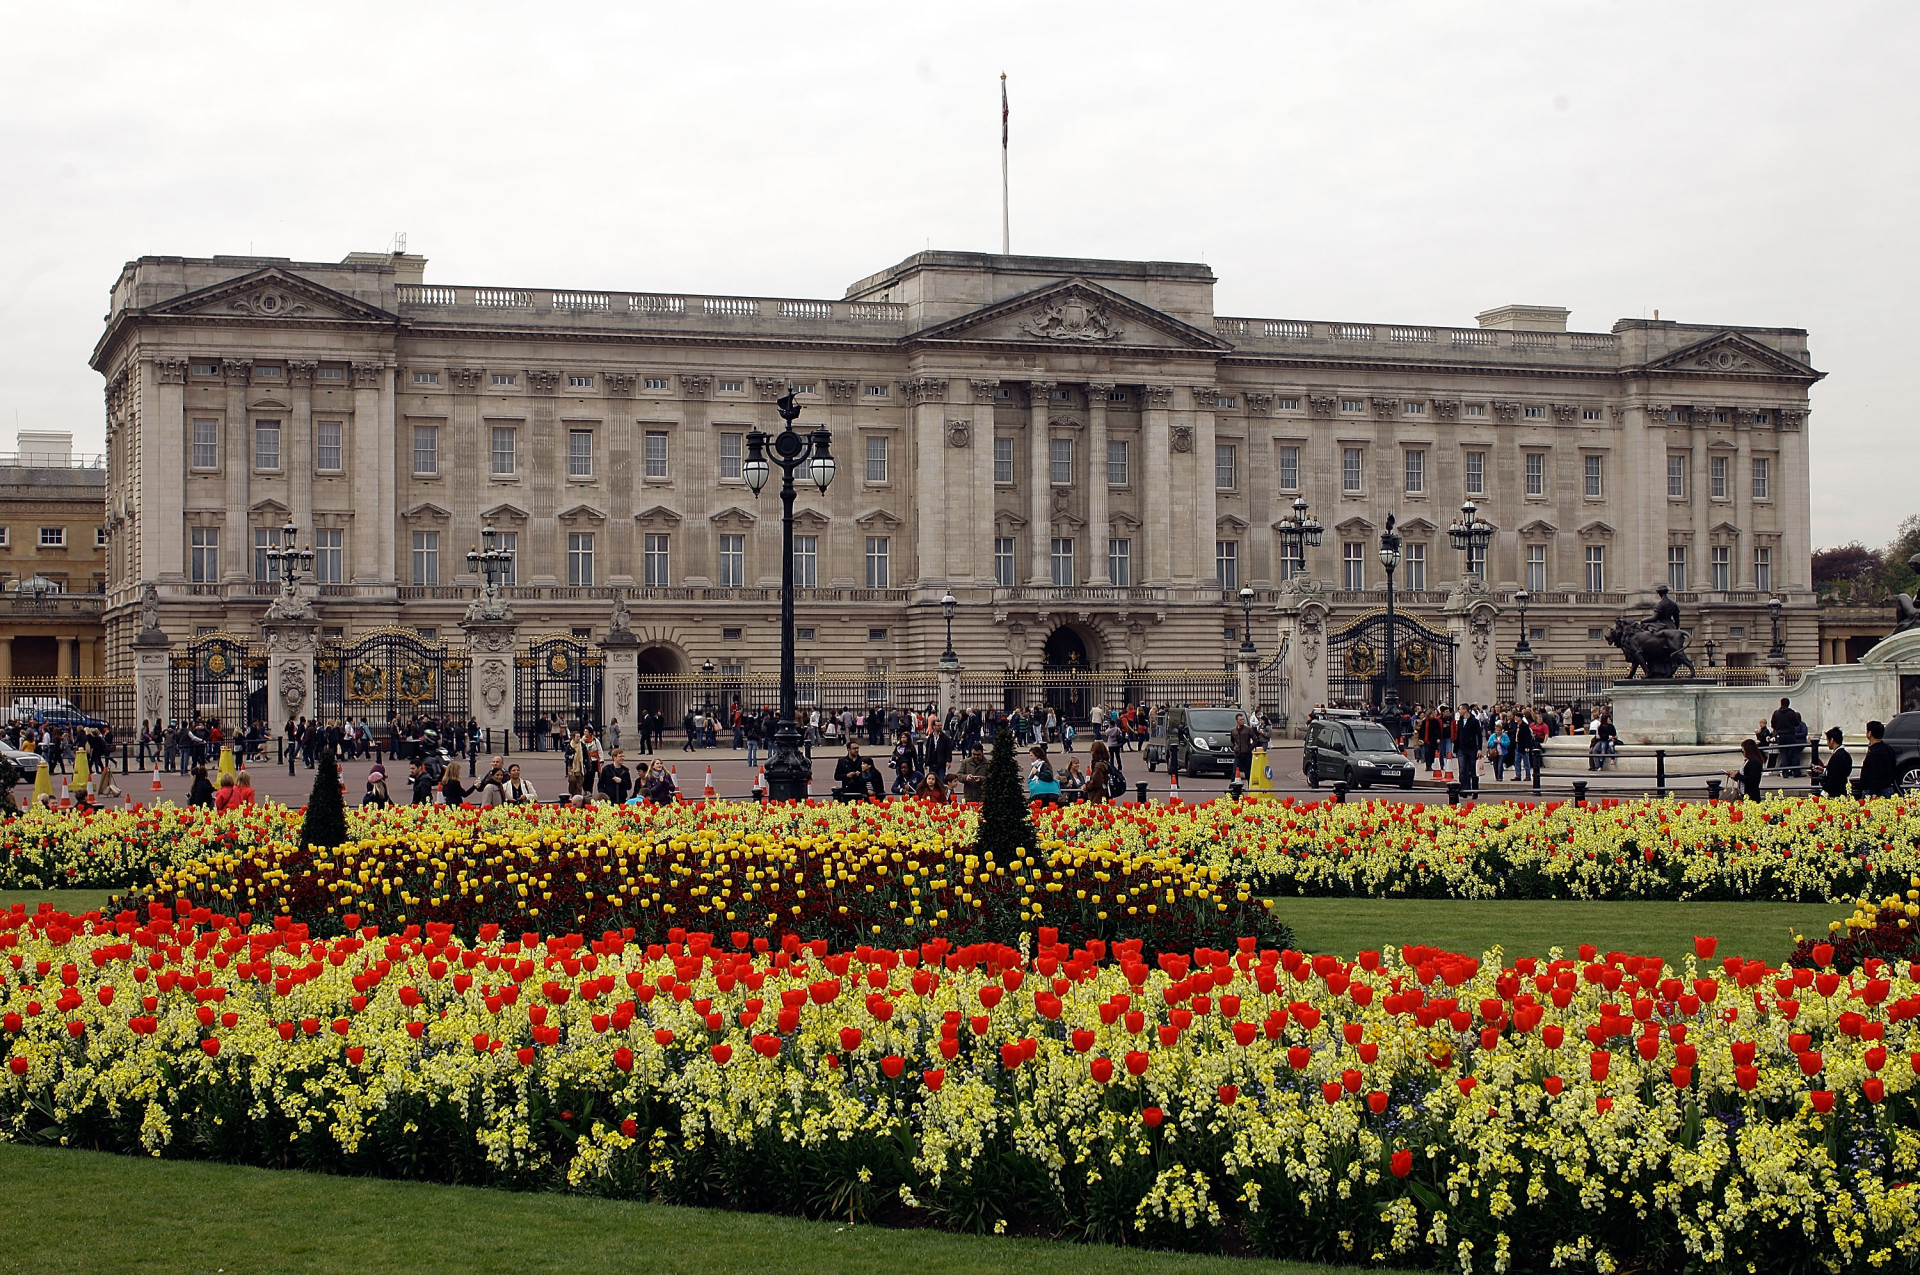 Spring flowers bloom outside the front gates of Buckingham Palace.